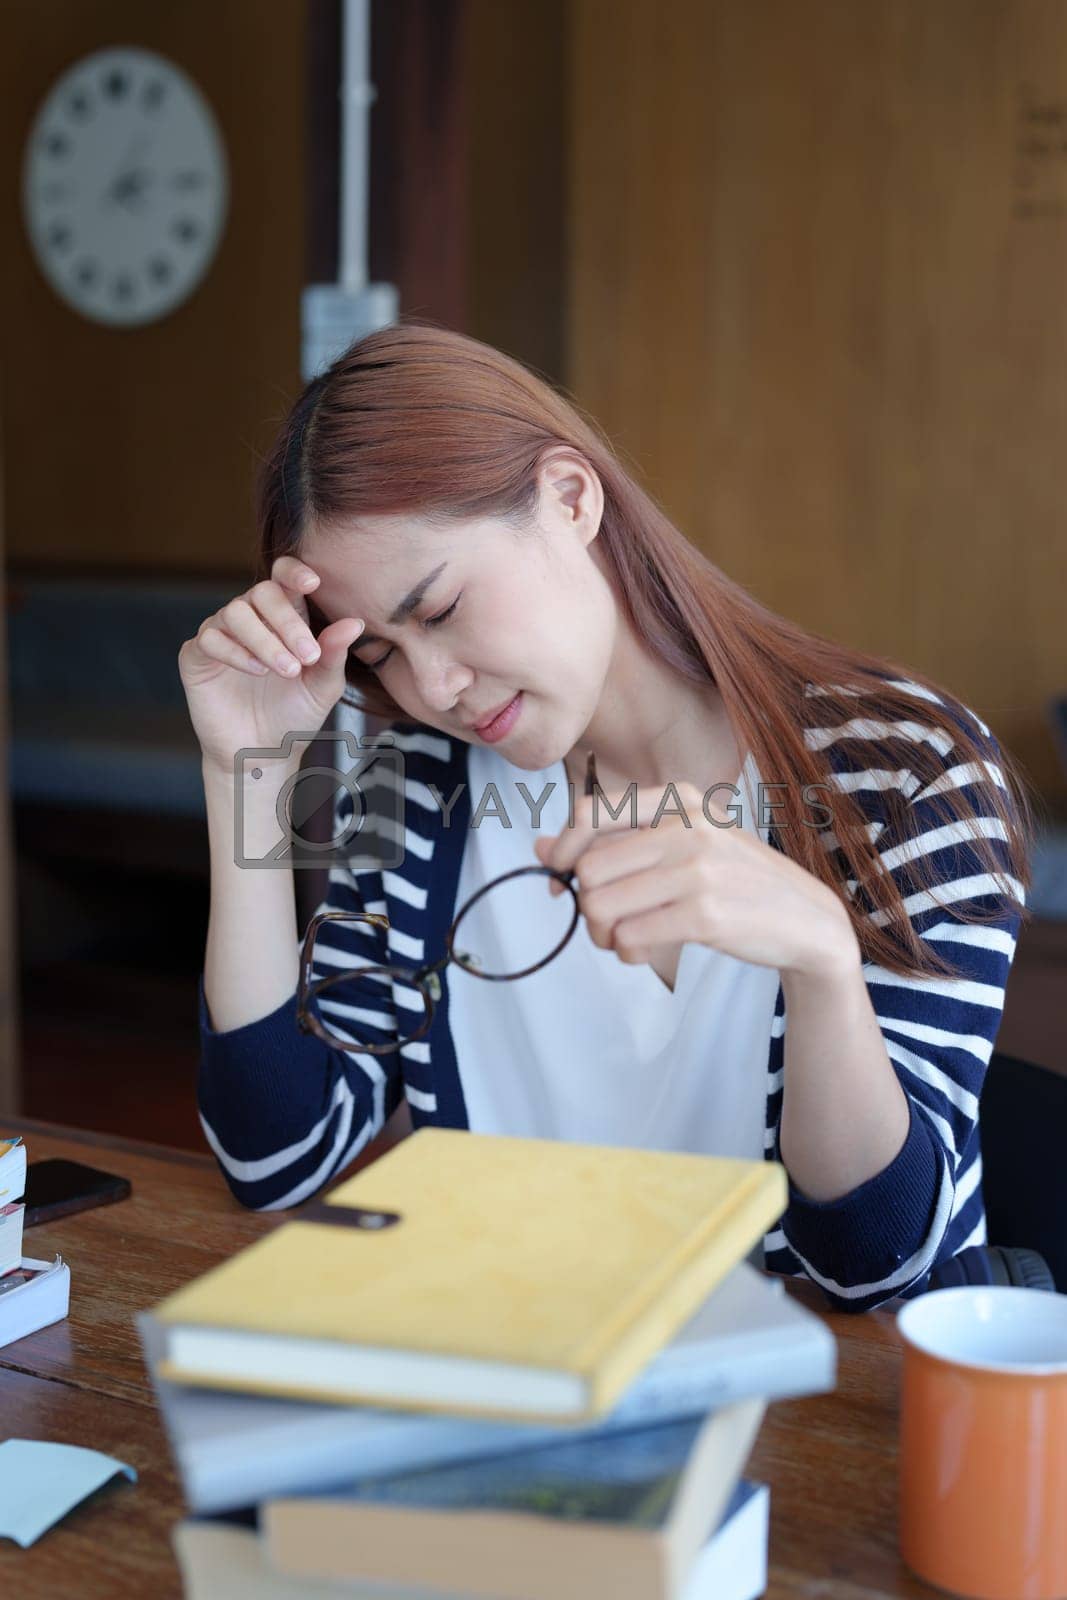 Royalty free image of A portrait of an Asian teenage girl showing headaches and discouragement from studying in the library by Manastrong